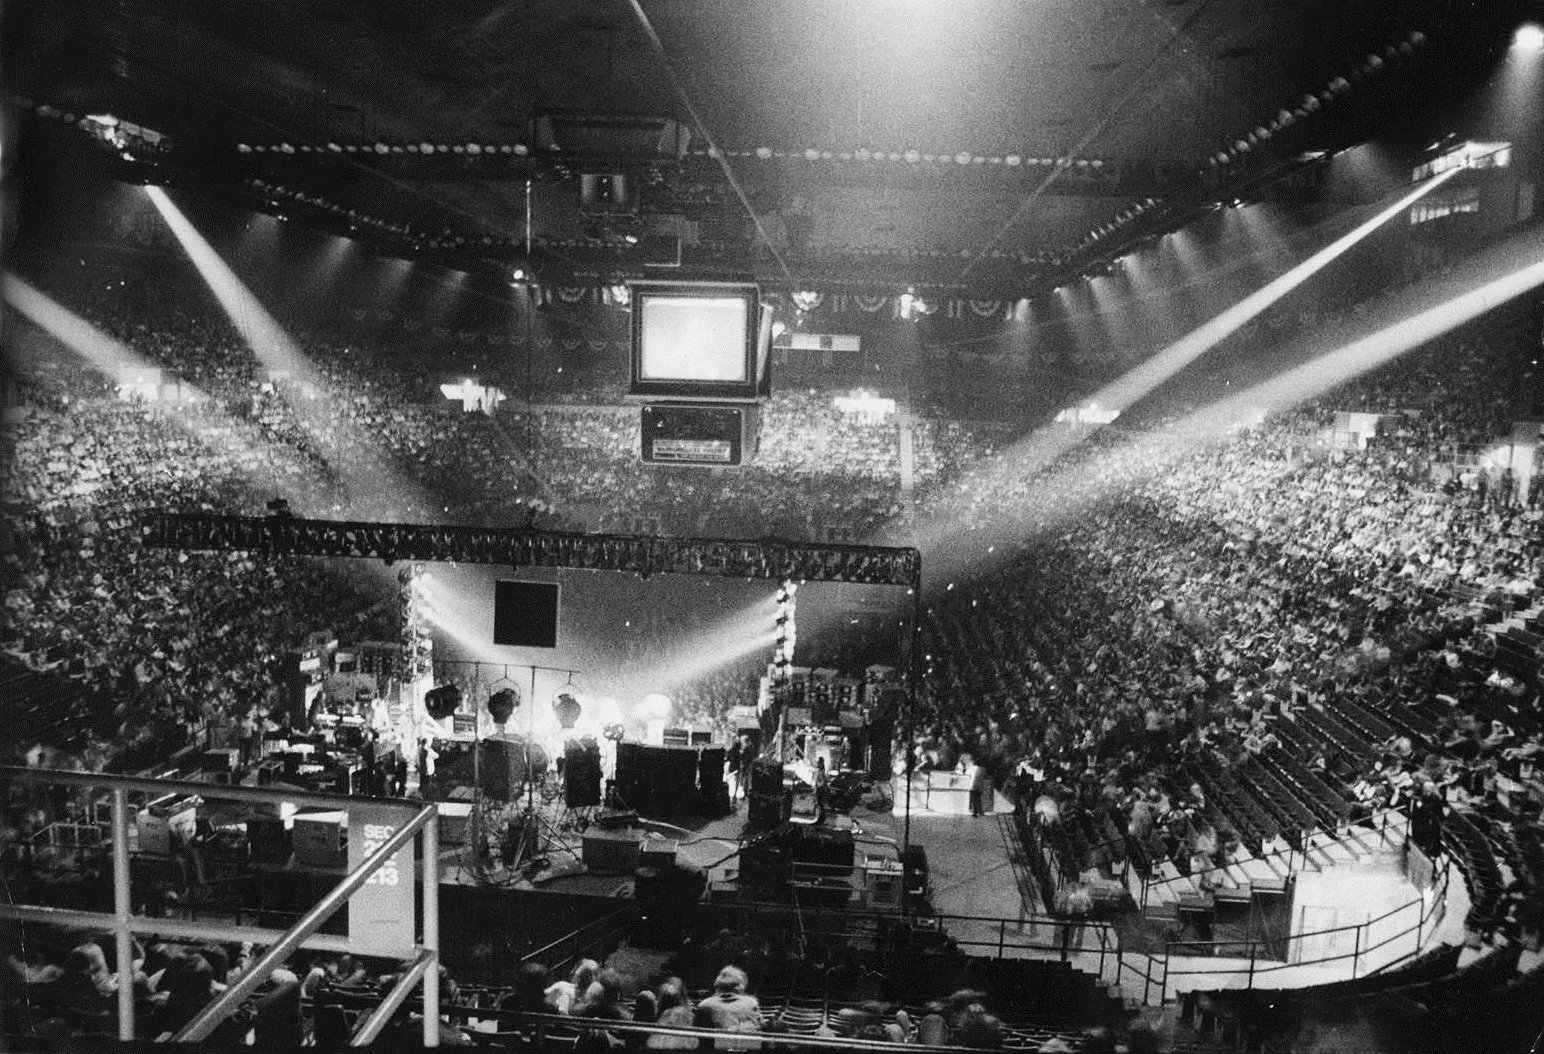 This photo shows inside of the Capital Centre the night of a 1974 concert. (Courtesy Martin Luther King Jr. Memorial Library Washingtoniana Collection)